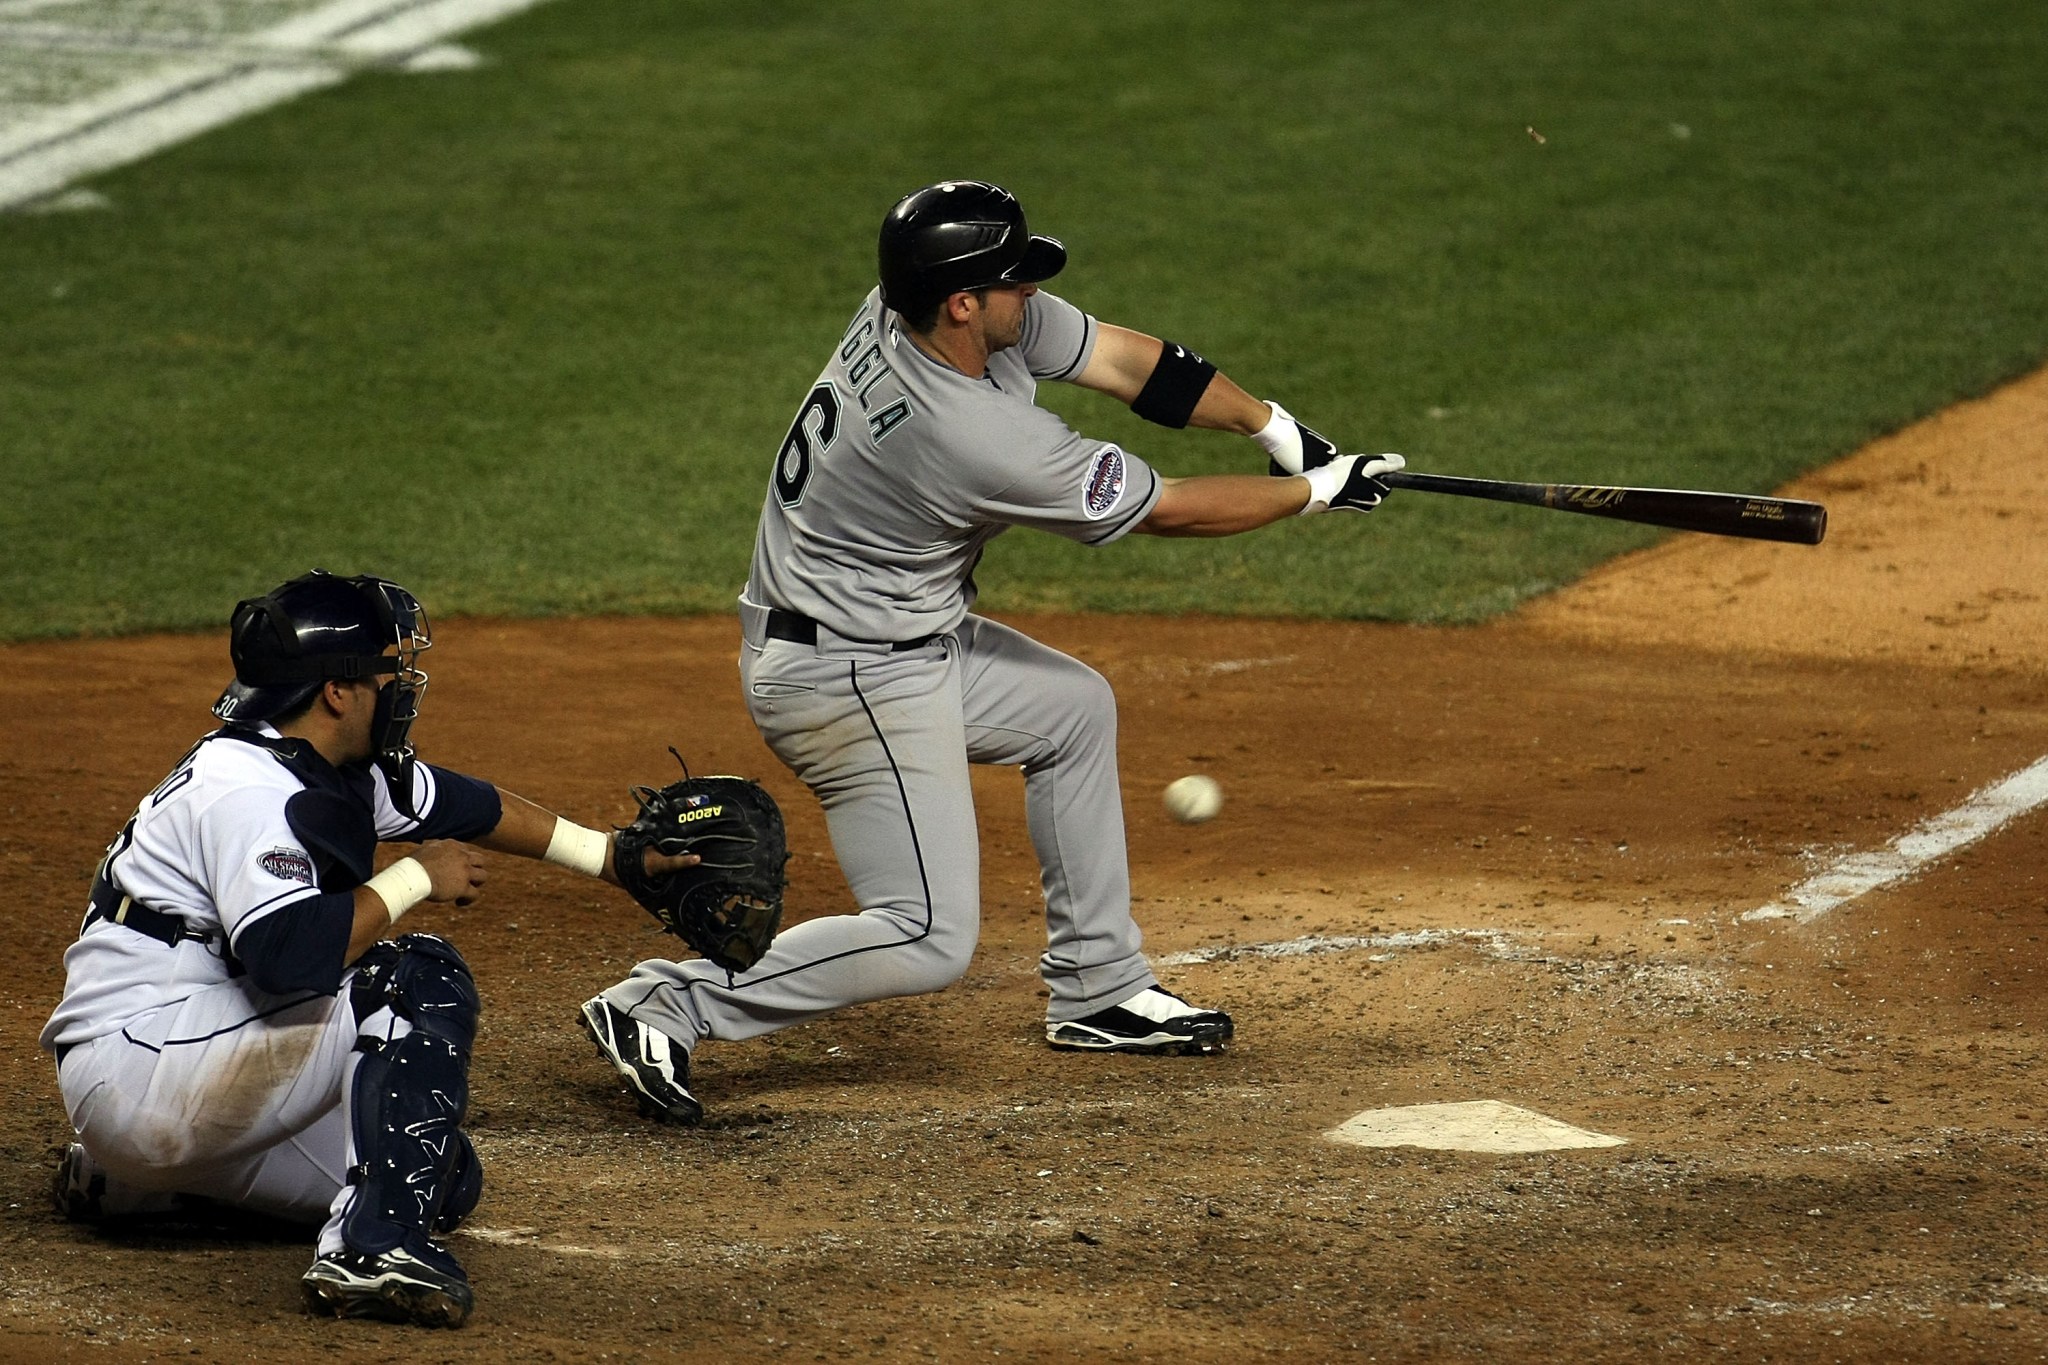 No One Will Ever Have A Worse All-Star Game Than Dan Uggla